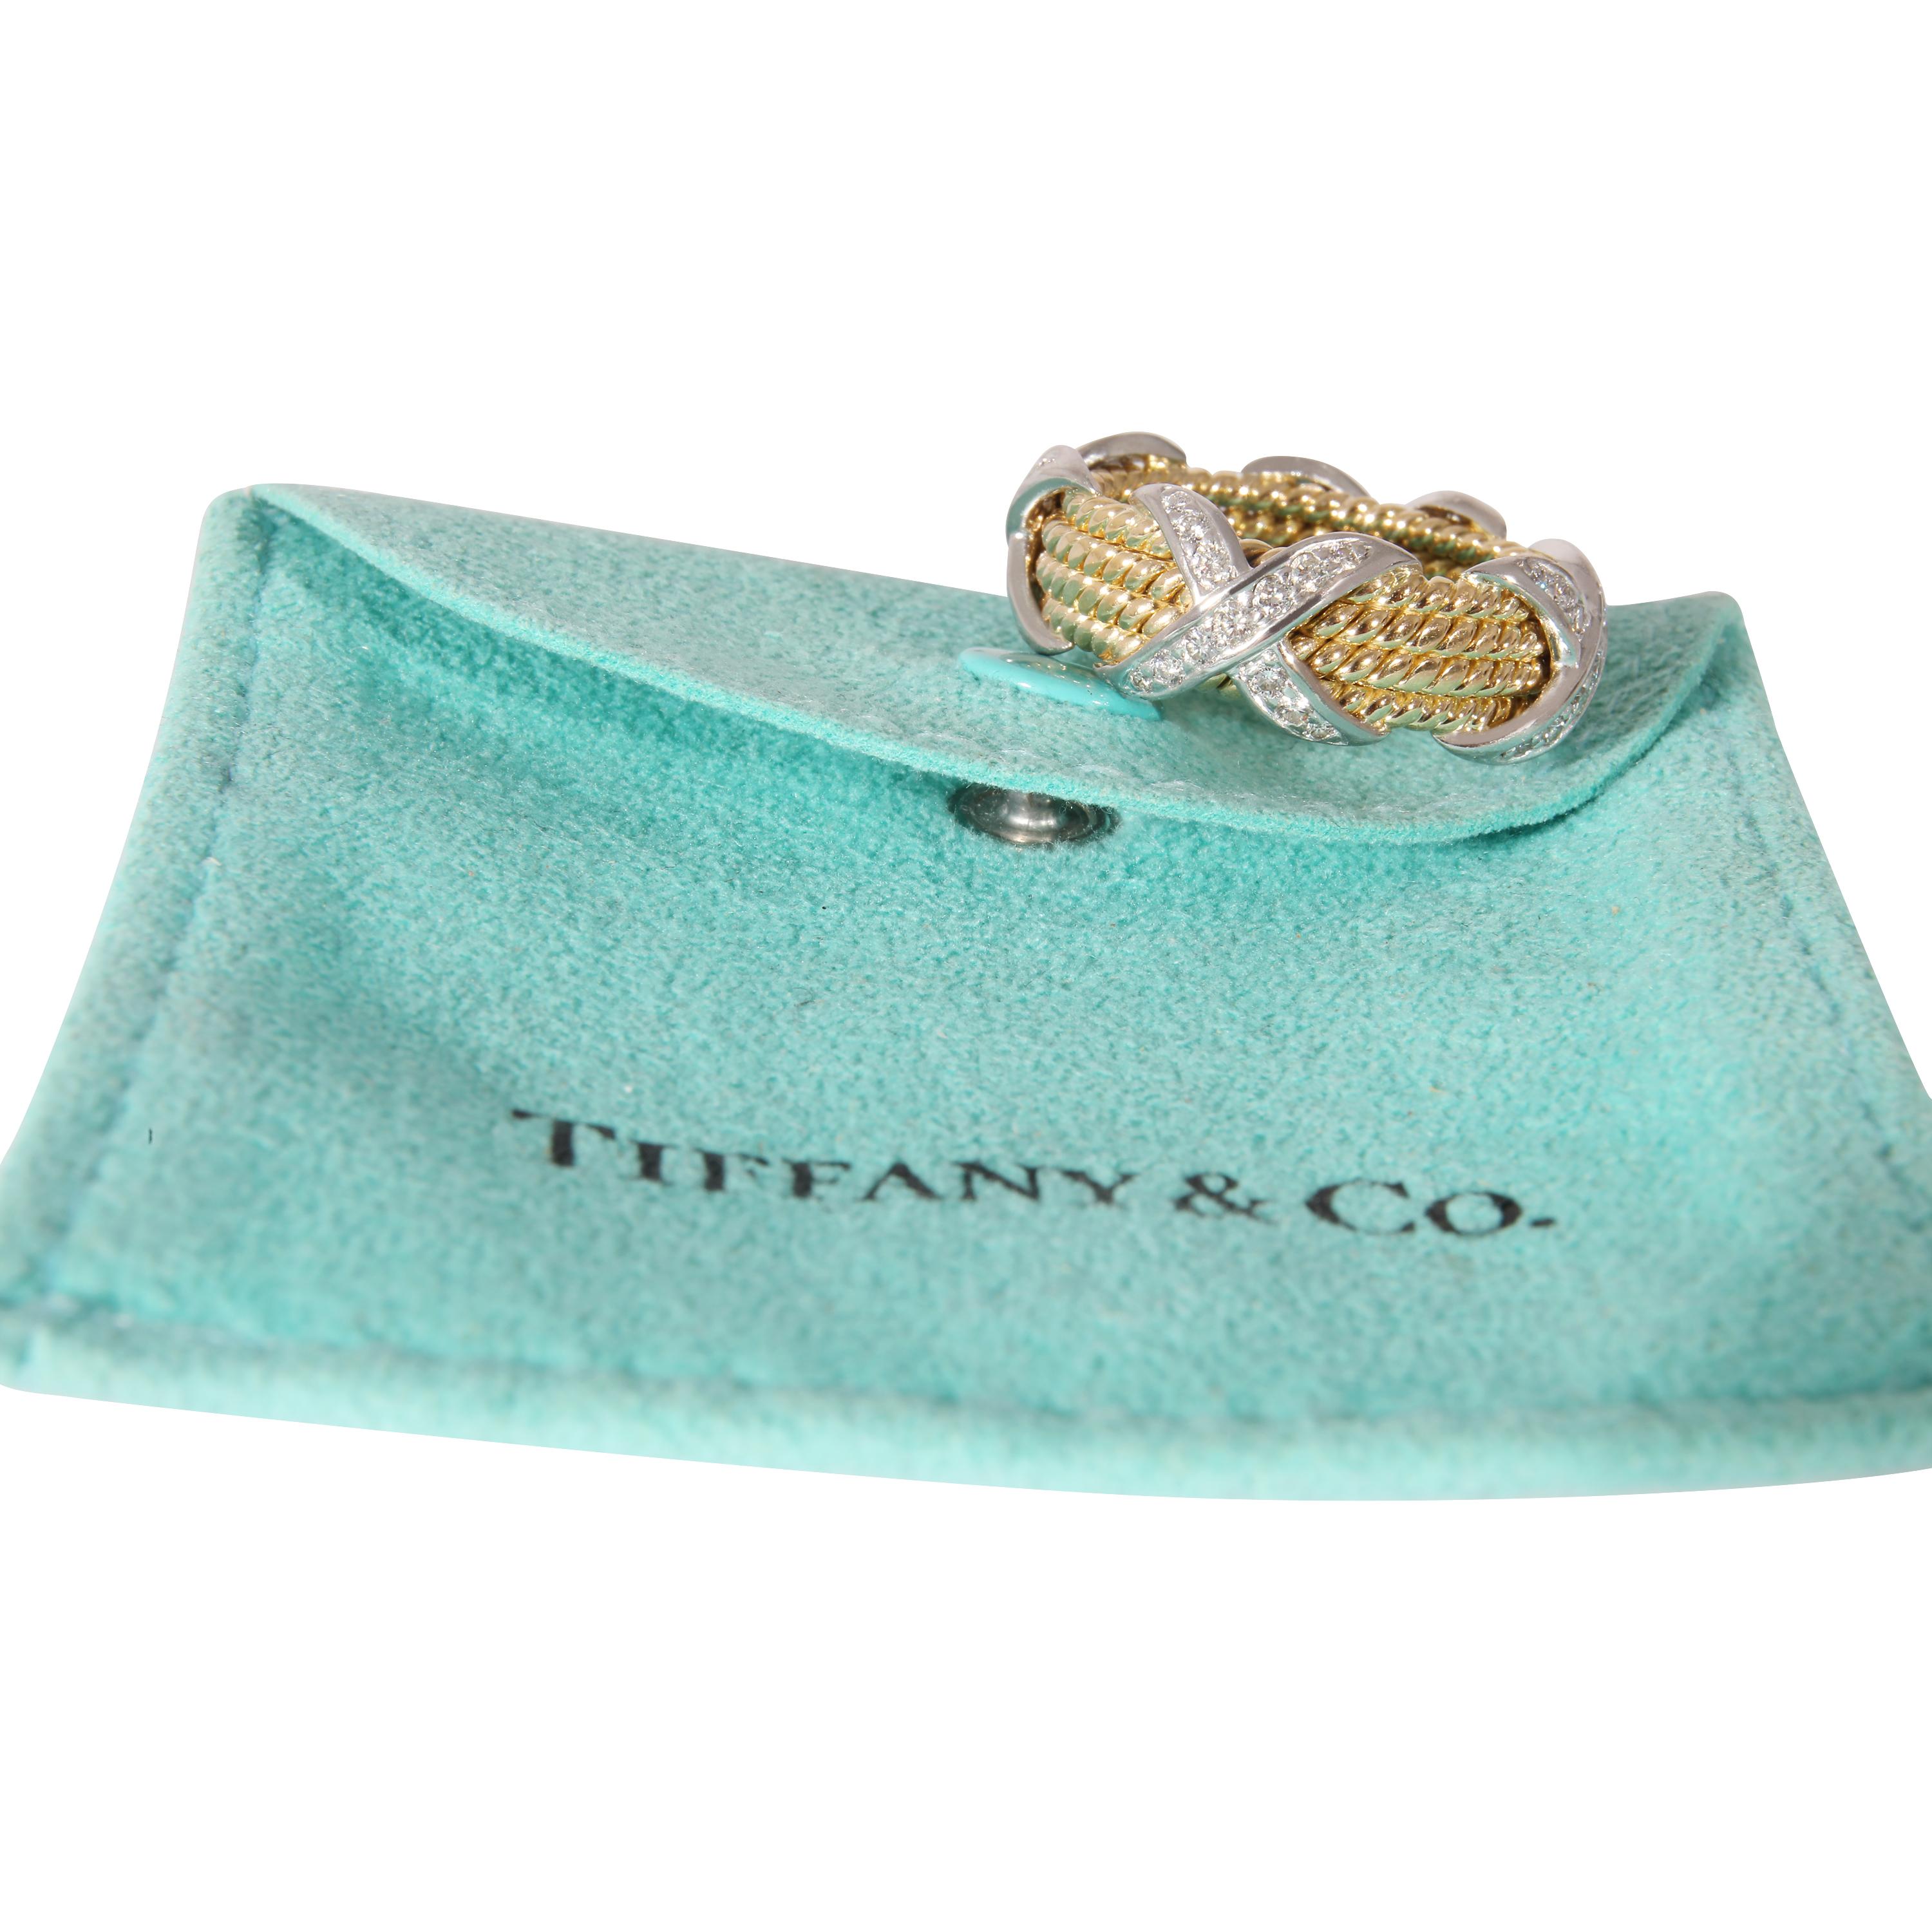 Tiffany & Co. Schlumberger Ring in 18k Yellow Gold/Platinum 0.54 CTW

PRIMARY DETAILS
SKU: 133662
Listing Title: Tiffany & Co. Schlumberger Ring in 18k Yellow Gold/Platinum 0.54 CTW
Condition Description: “I want to capture the irregularity of the